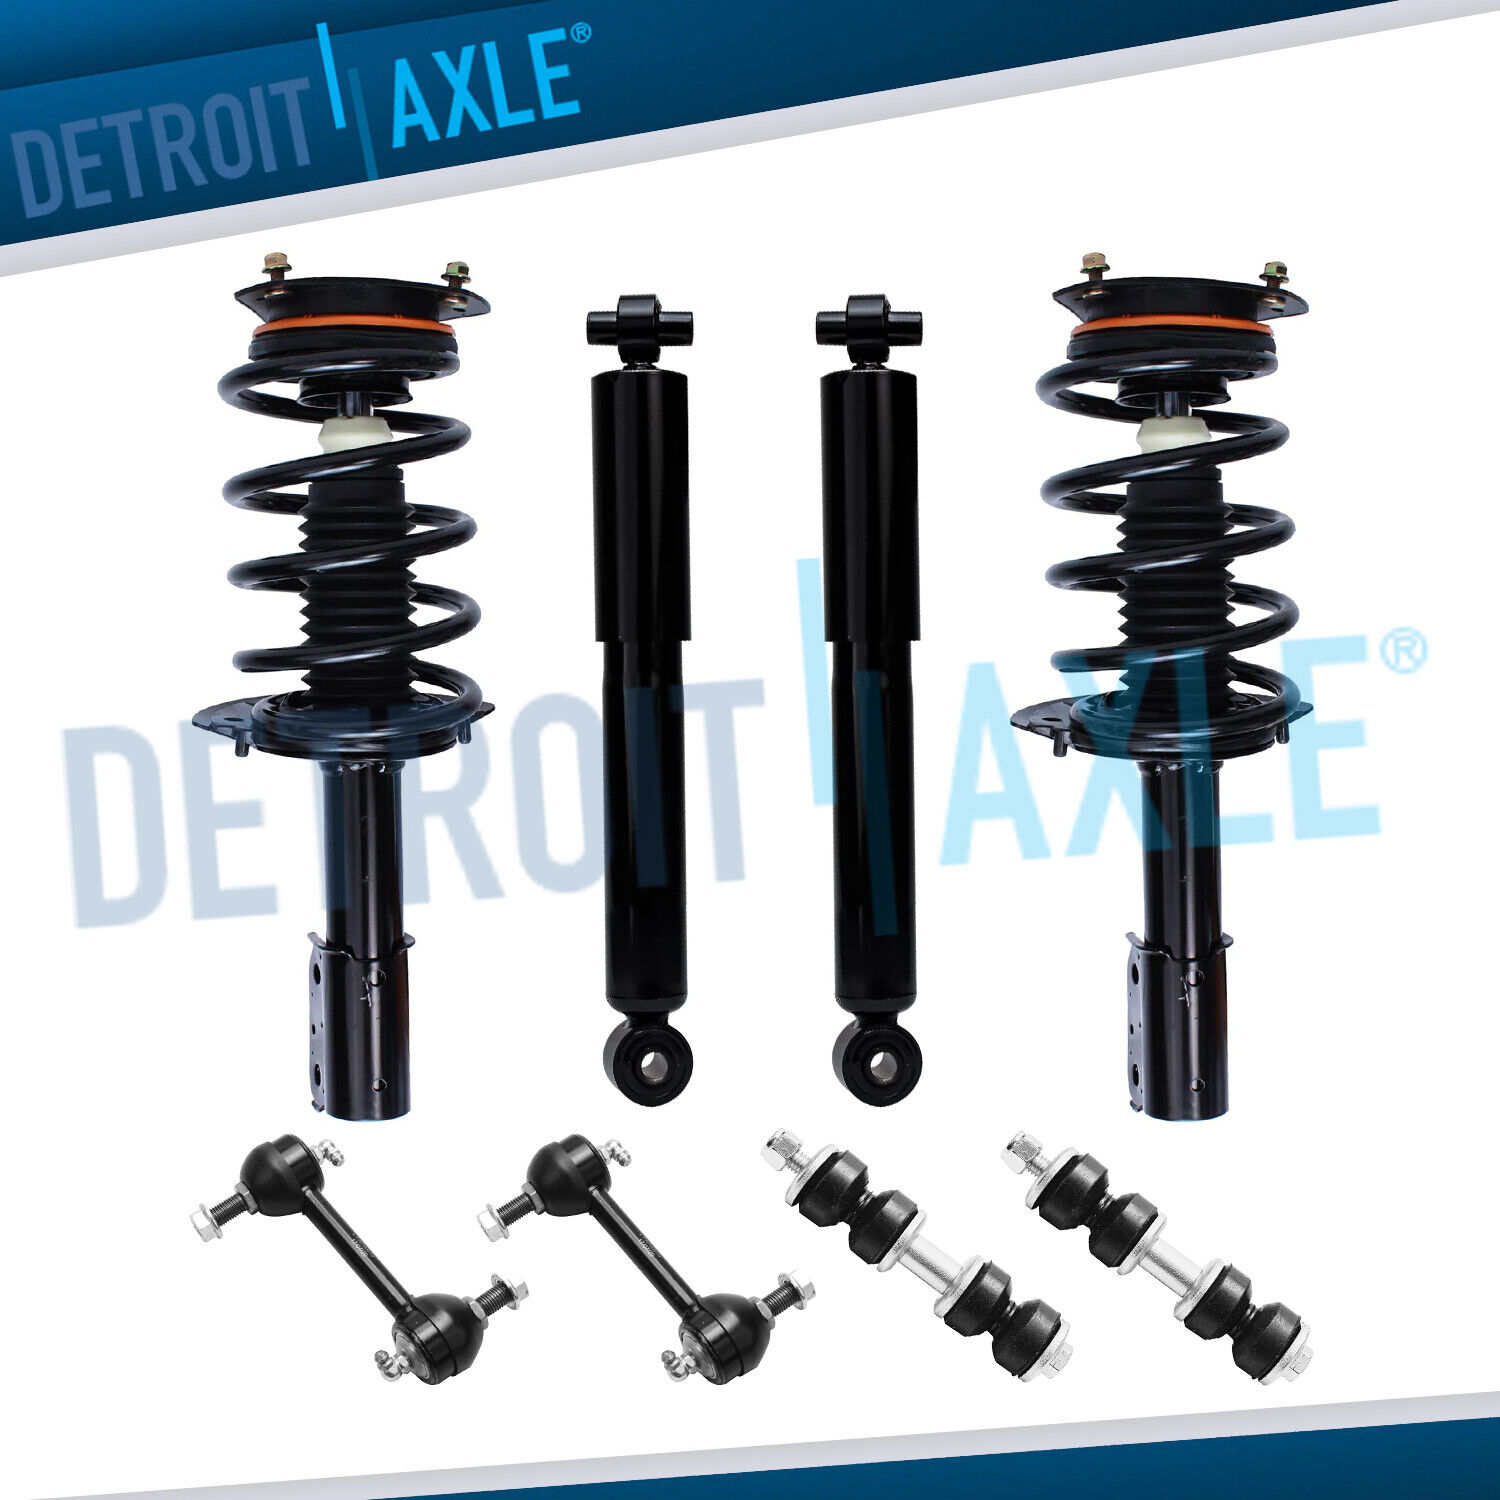 Front Struts Coil Spring Rear Shocks Sway Bar for Pontiac Aztec Buick Rendezvous